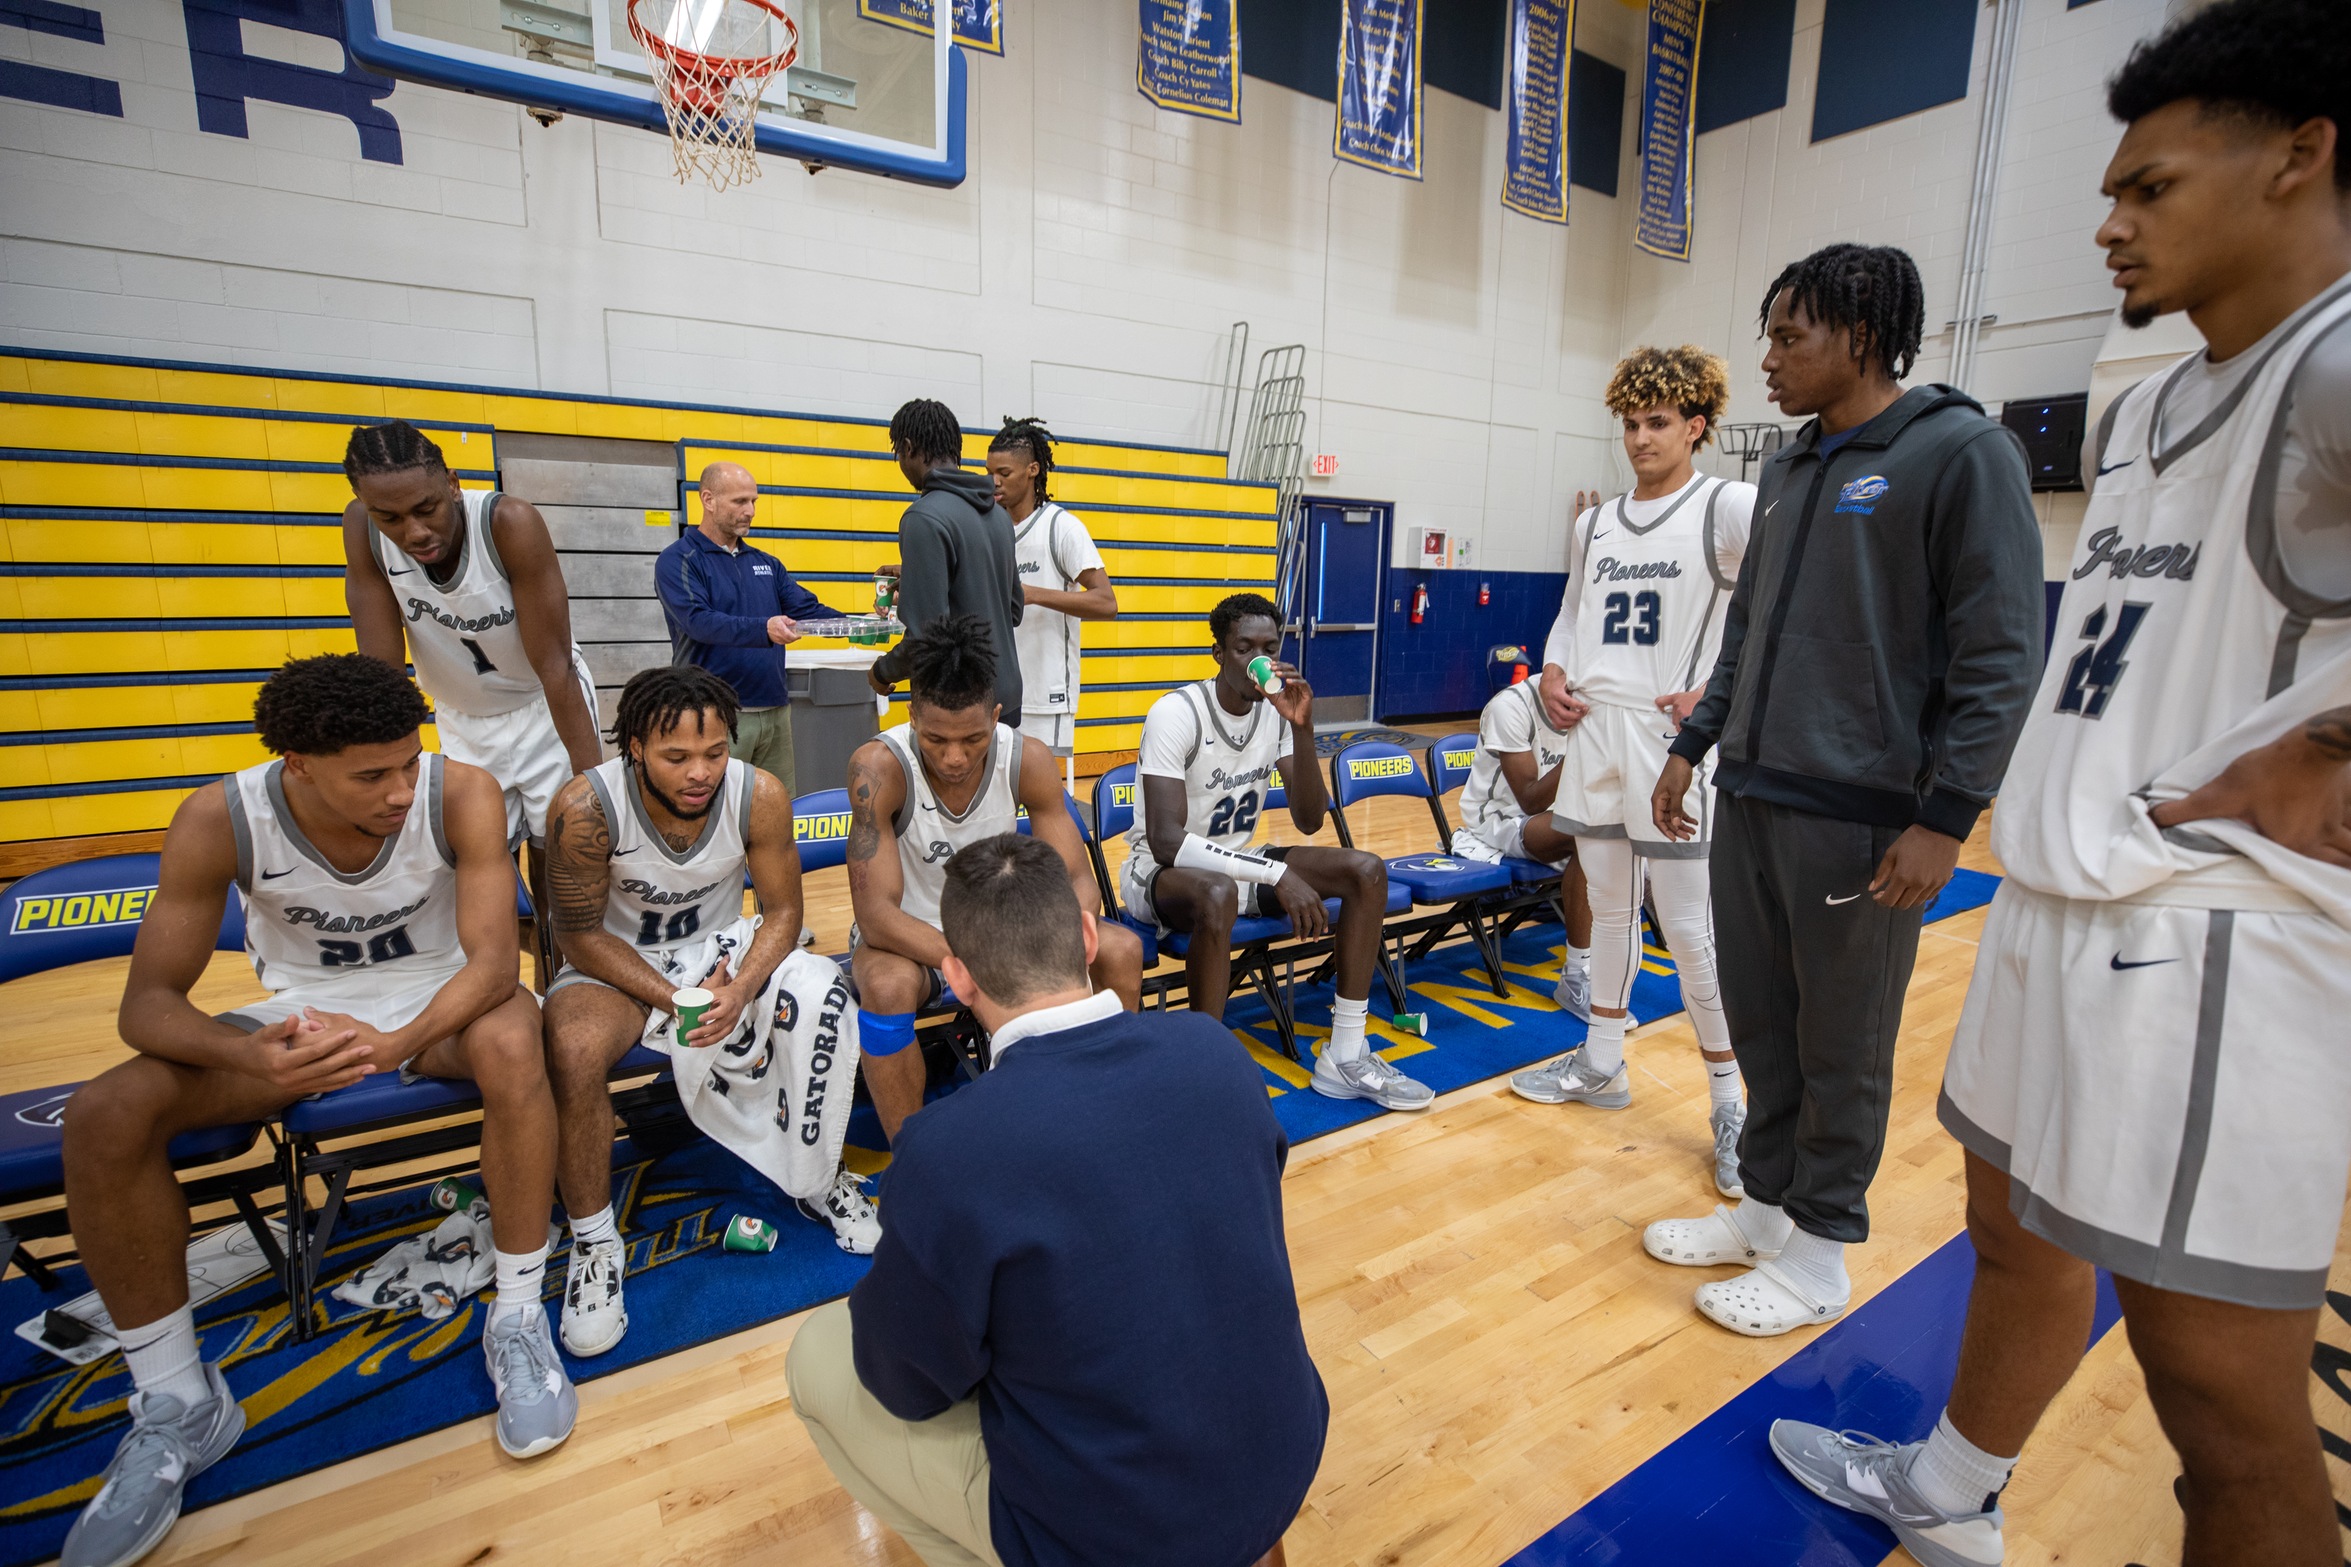 Indian River protects home court in first conference home game